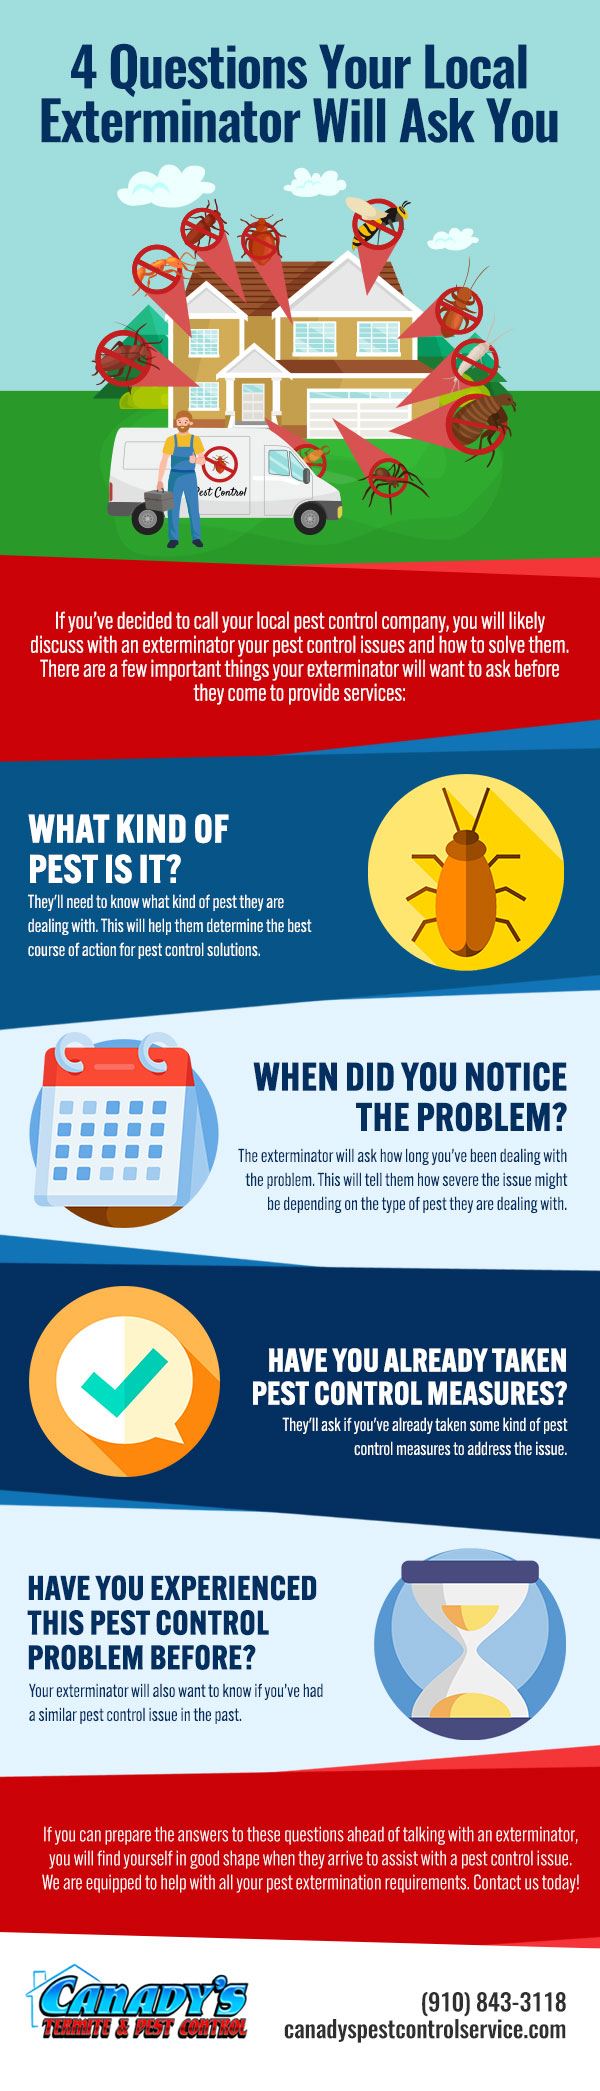 4 Questions Your Local Exterminator Will Ask You